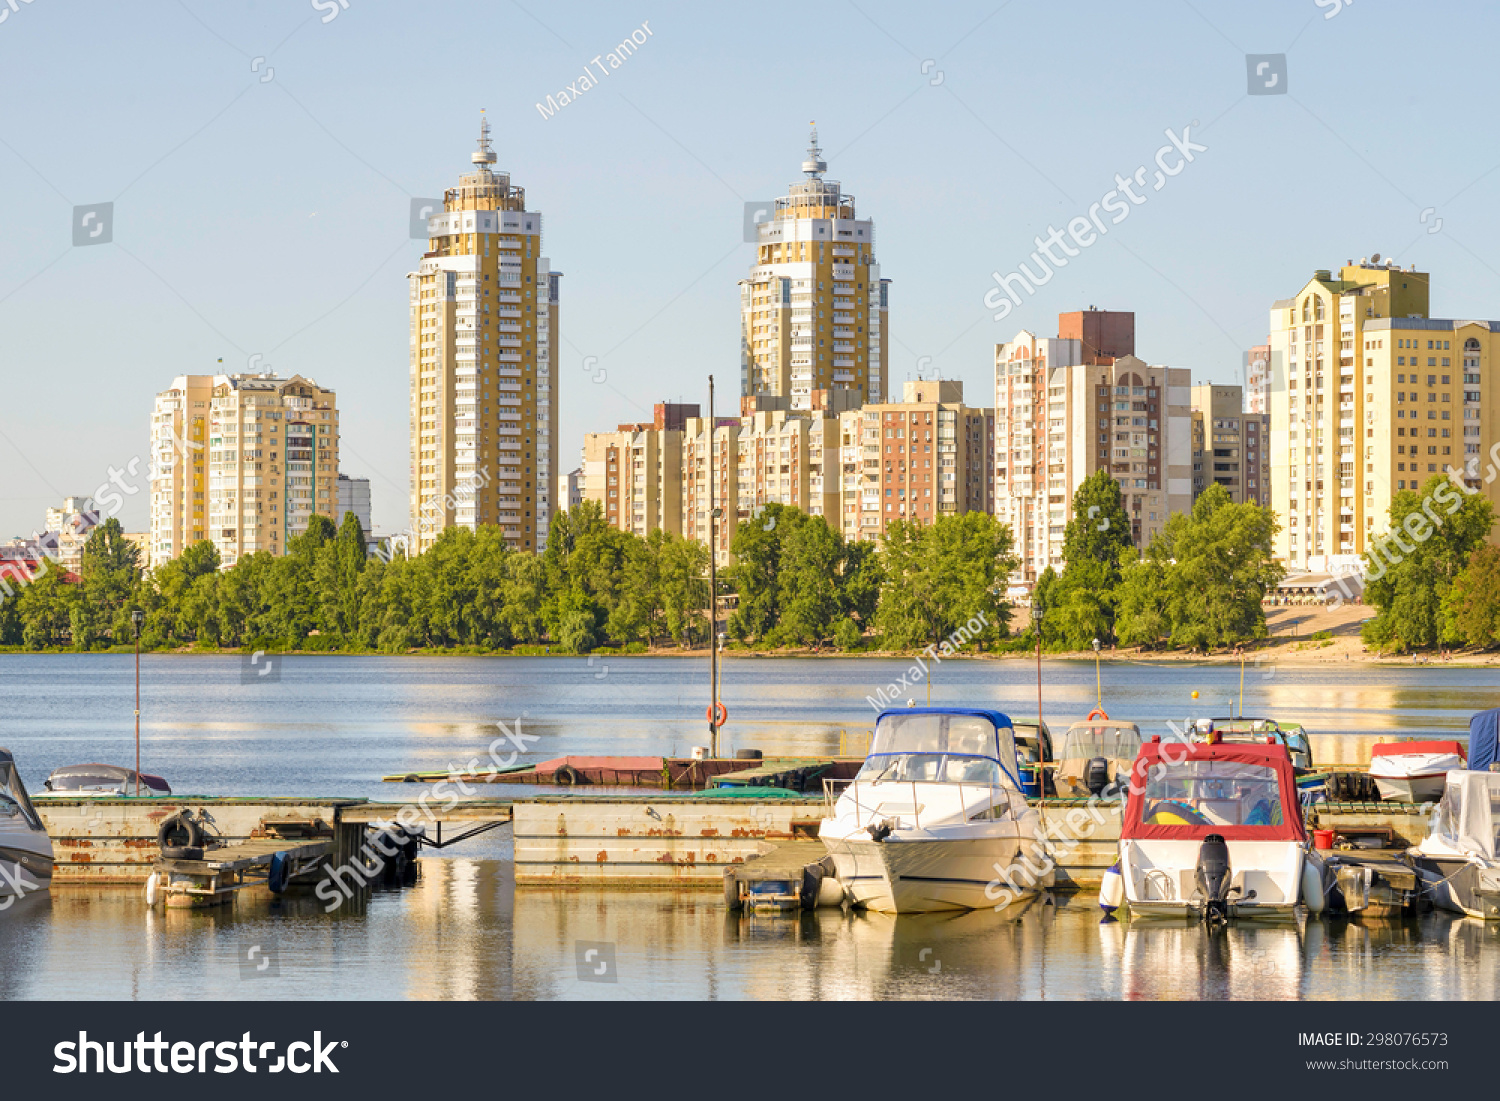 https://image.shutterstock.com/z/stock-photo-some-boats-are-parked-on-the-dnieper-river-in-kiev-ukraine-high-buildings-of-the-city-appears-in-298076573.jpg